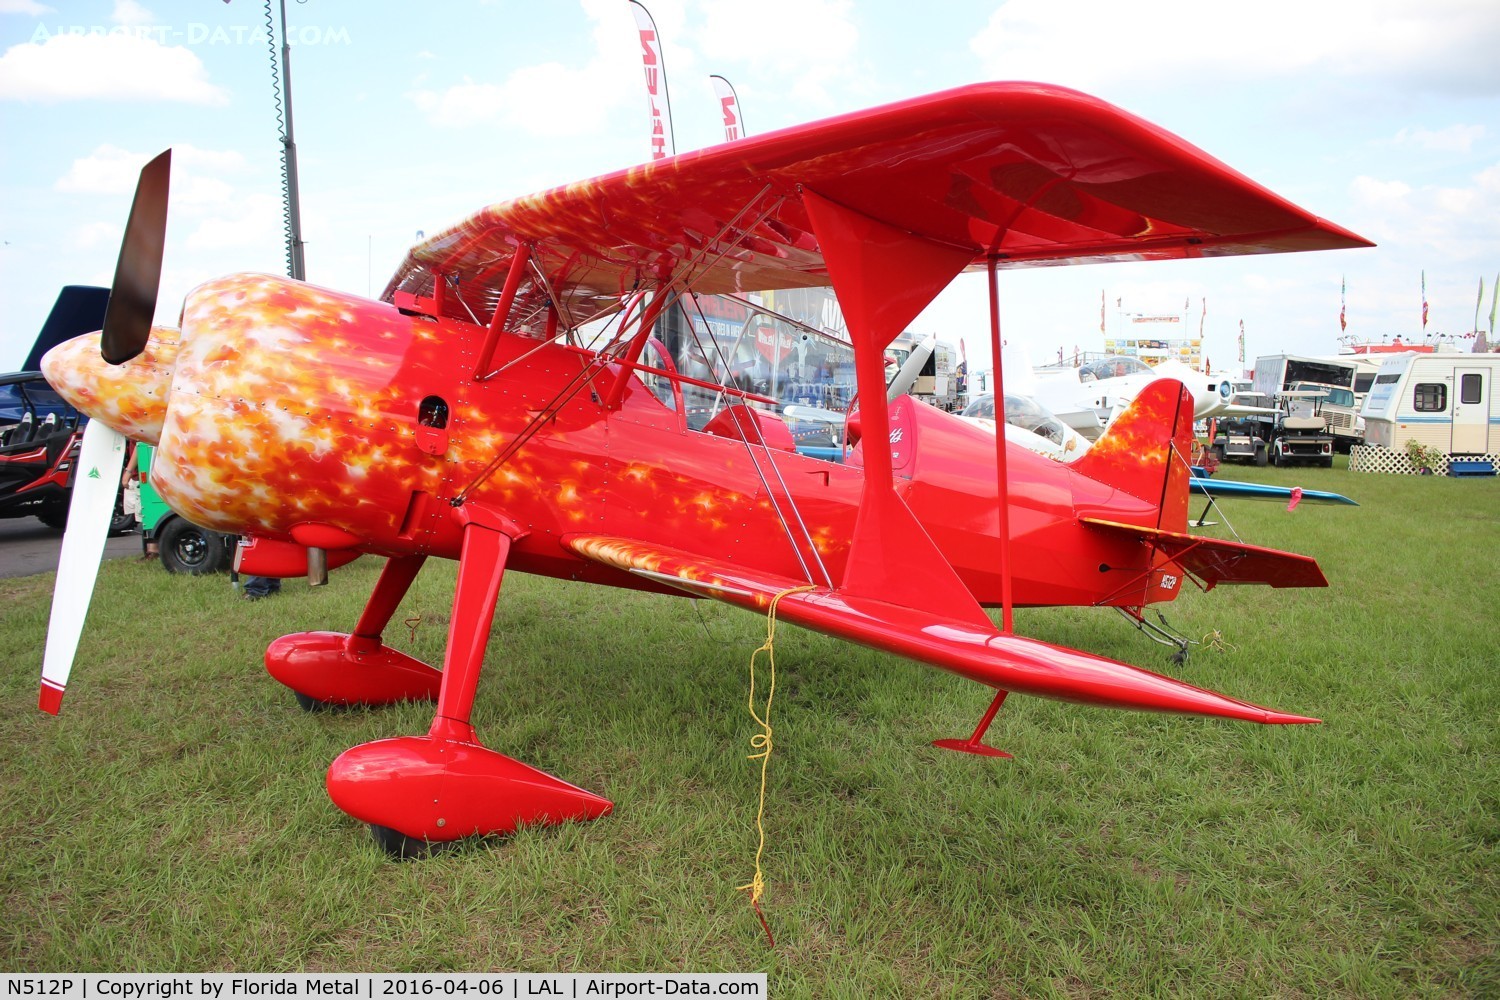 N512P, 2013 Pitts 12 C/N 291, Pitts 12